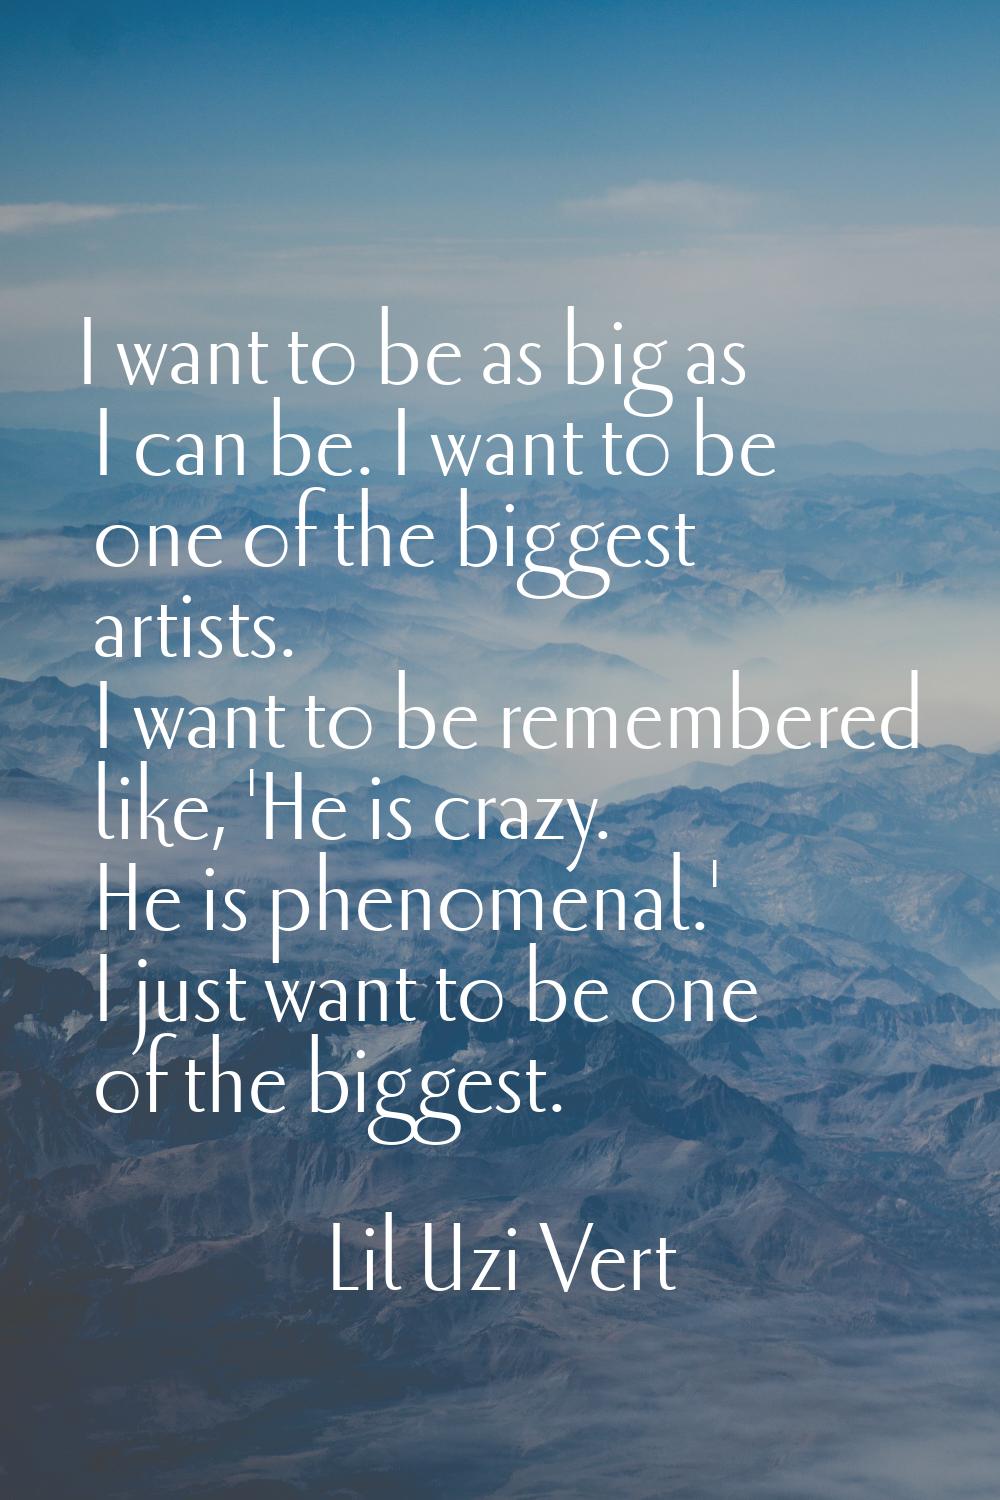 I want to be as big as I can be. I want to be one of the biggest artists. I want to be remembered l